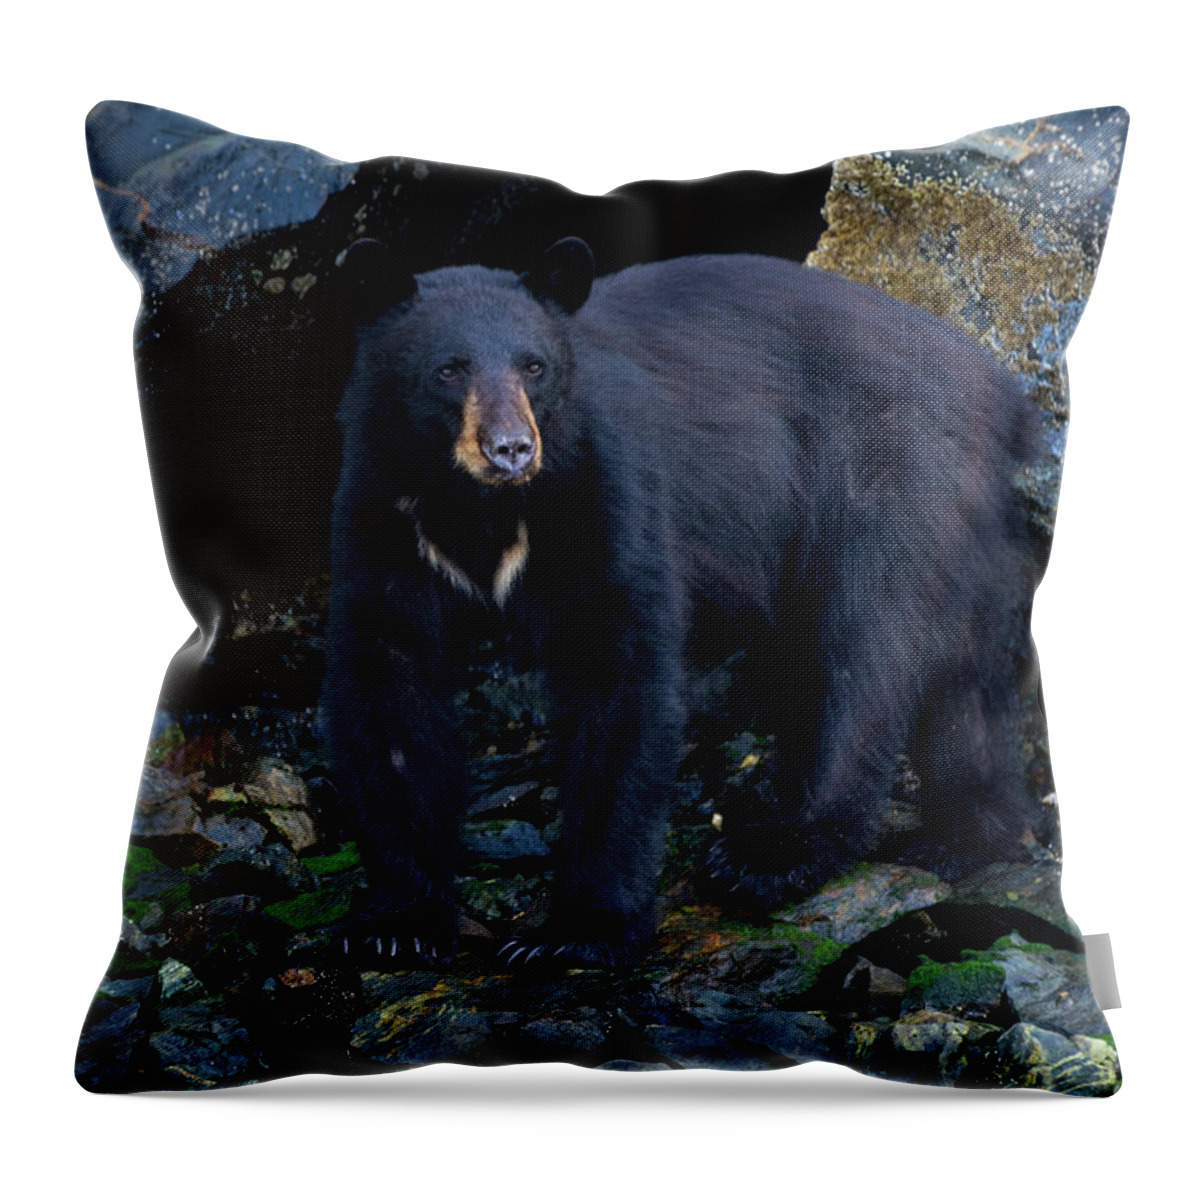 Fear Of Change Throw Pillow featuring the photograph Fear Of Change - Bear Art by Jordan Blackstone